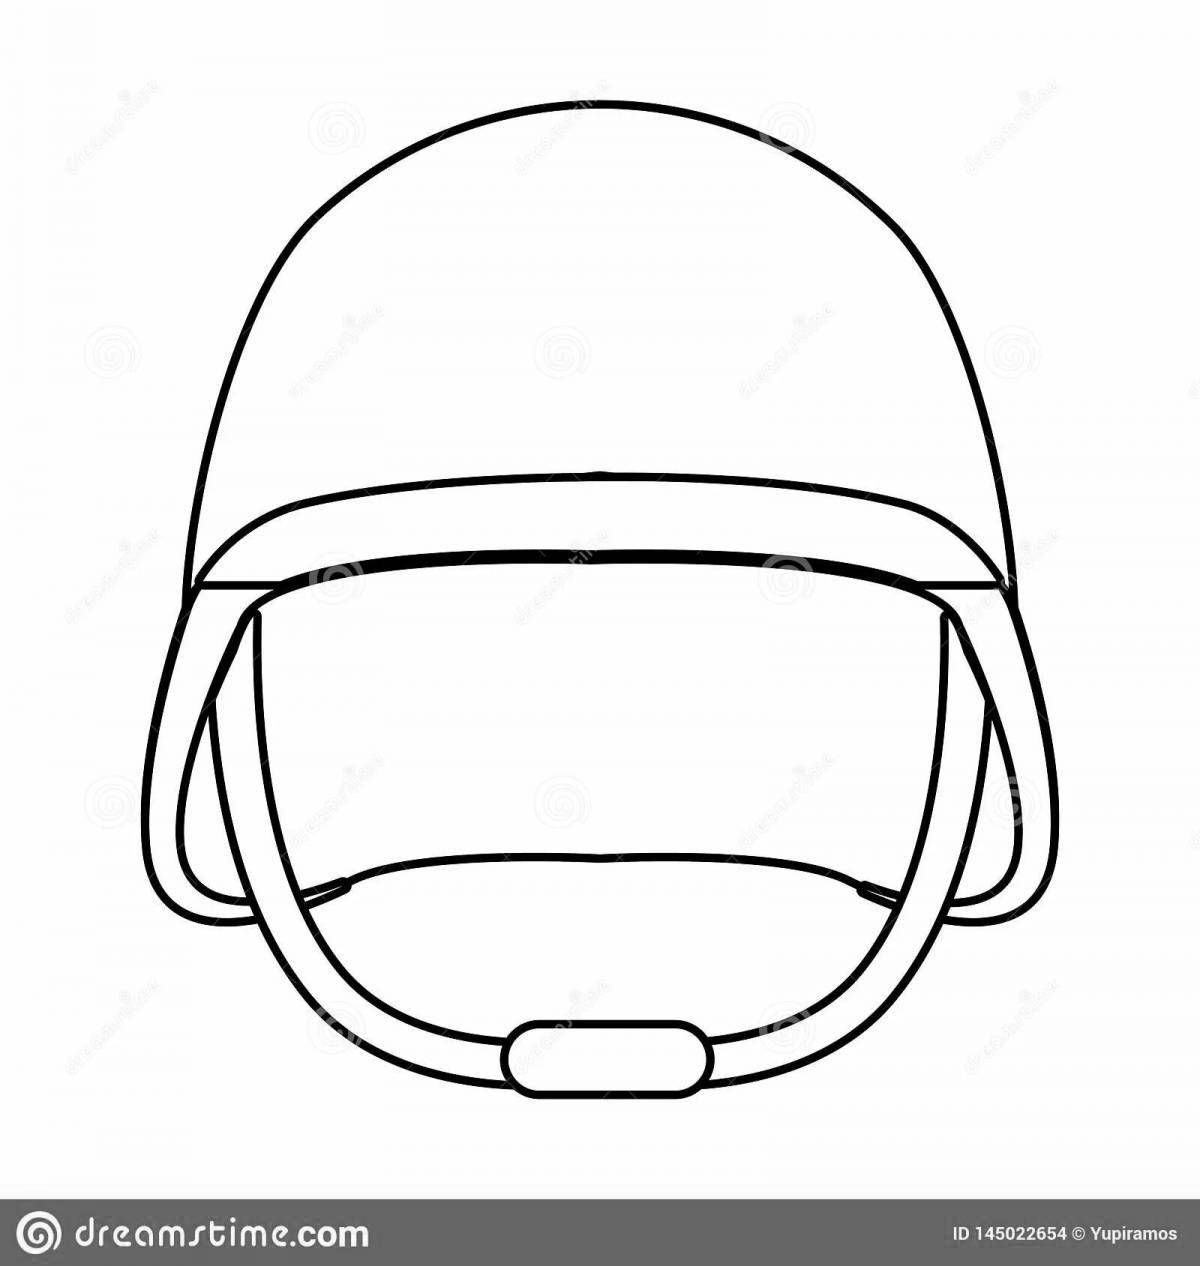 Coloring helmet of a brave soldier